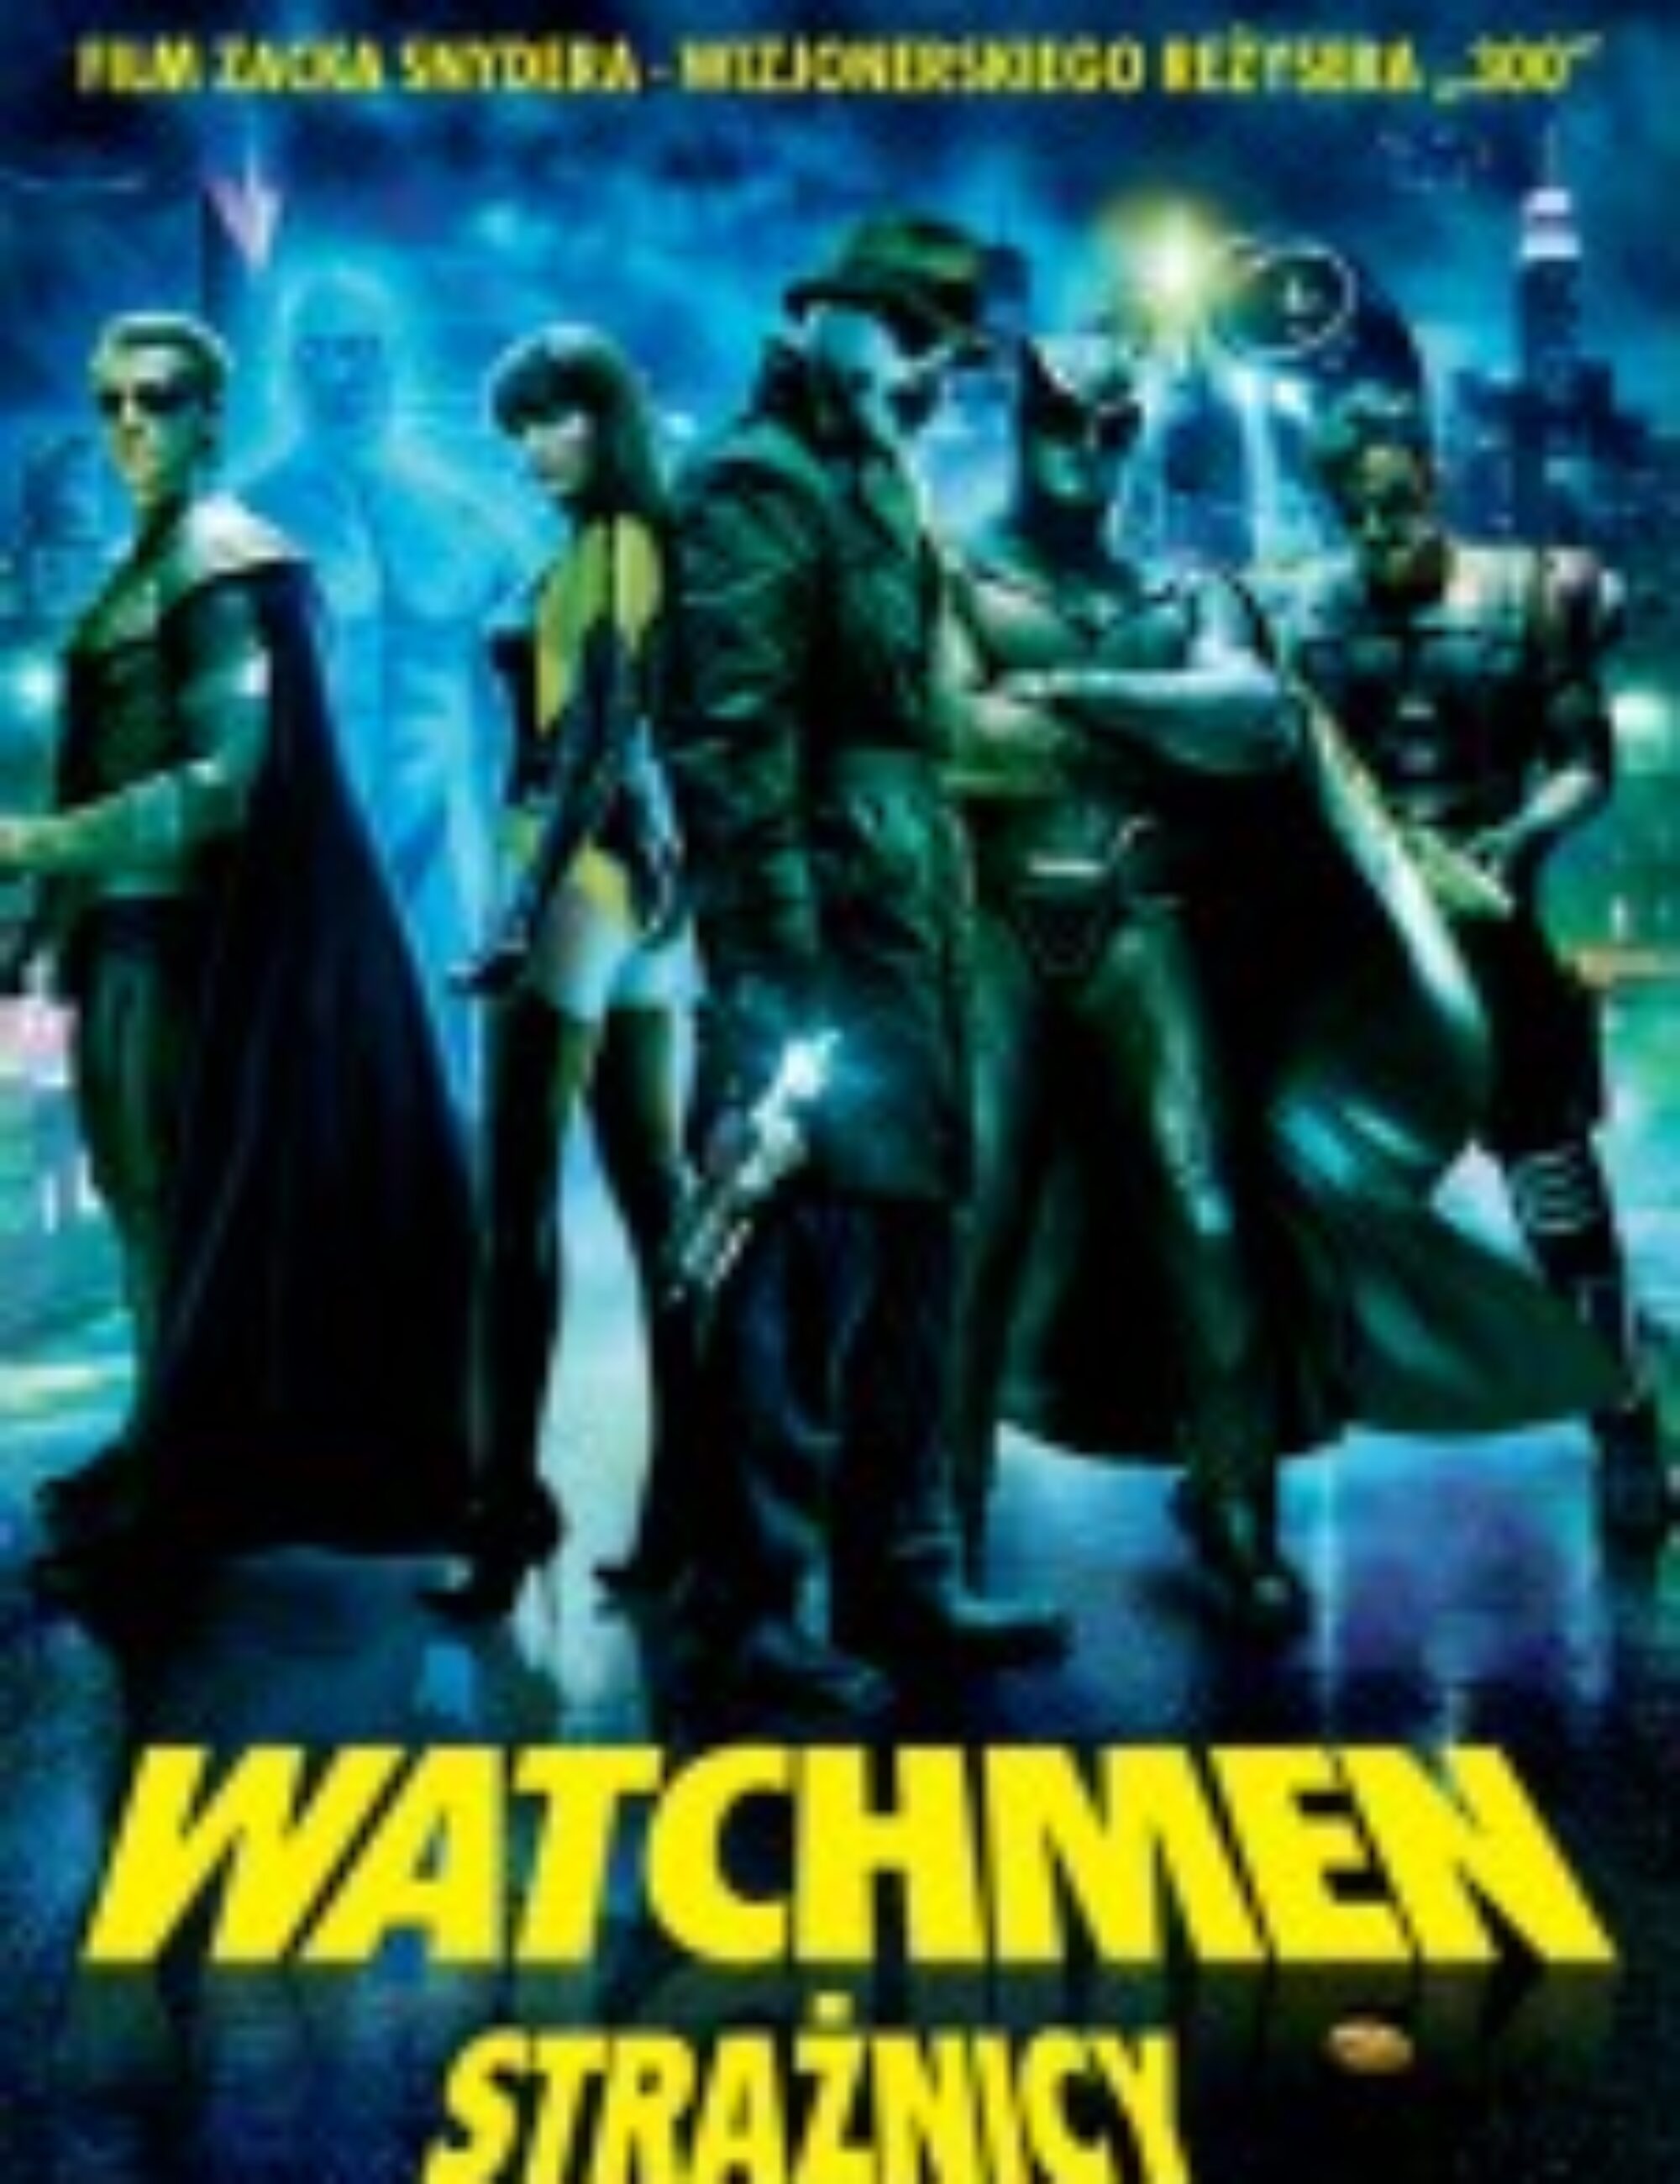 „Watchmen Strażnicy” – Alan Moore, Dave Gibbons, Zack Snyder